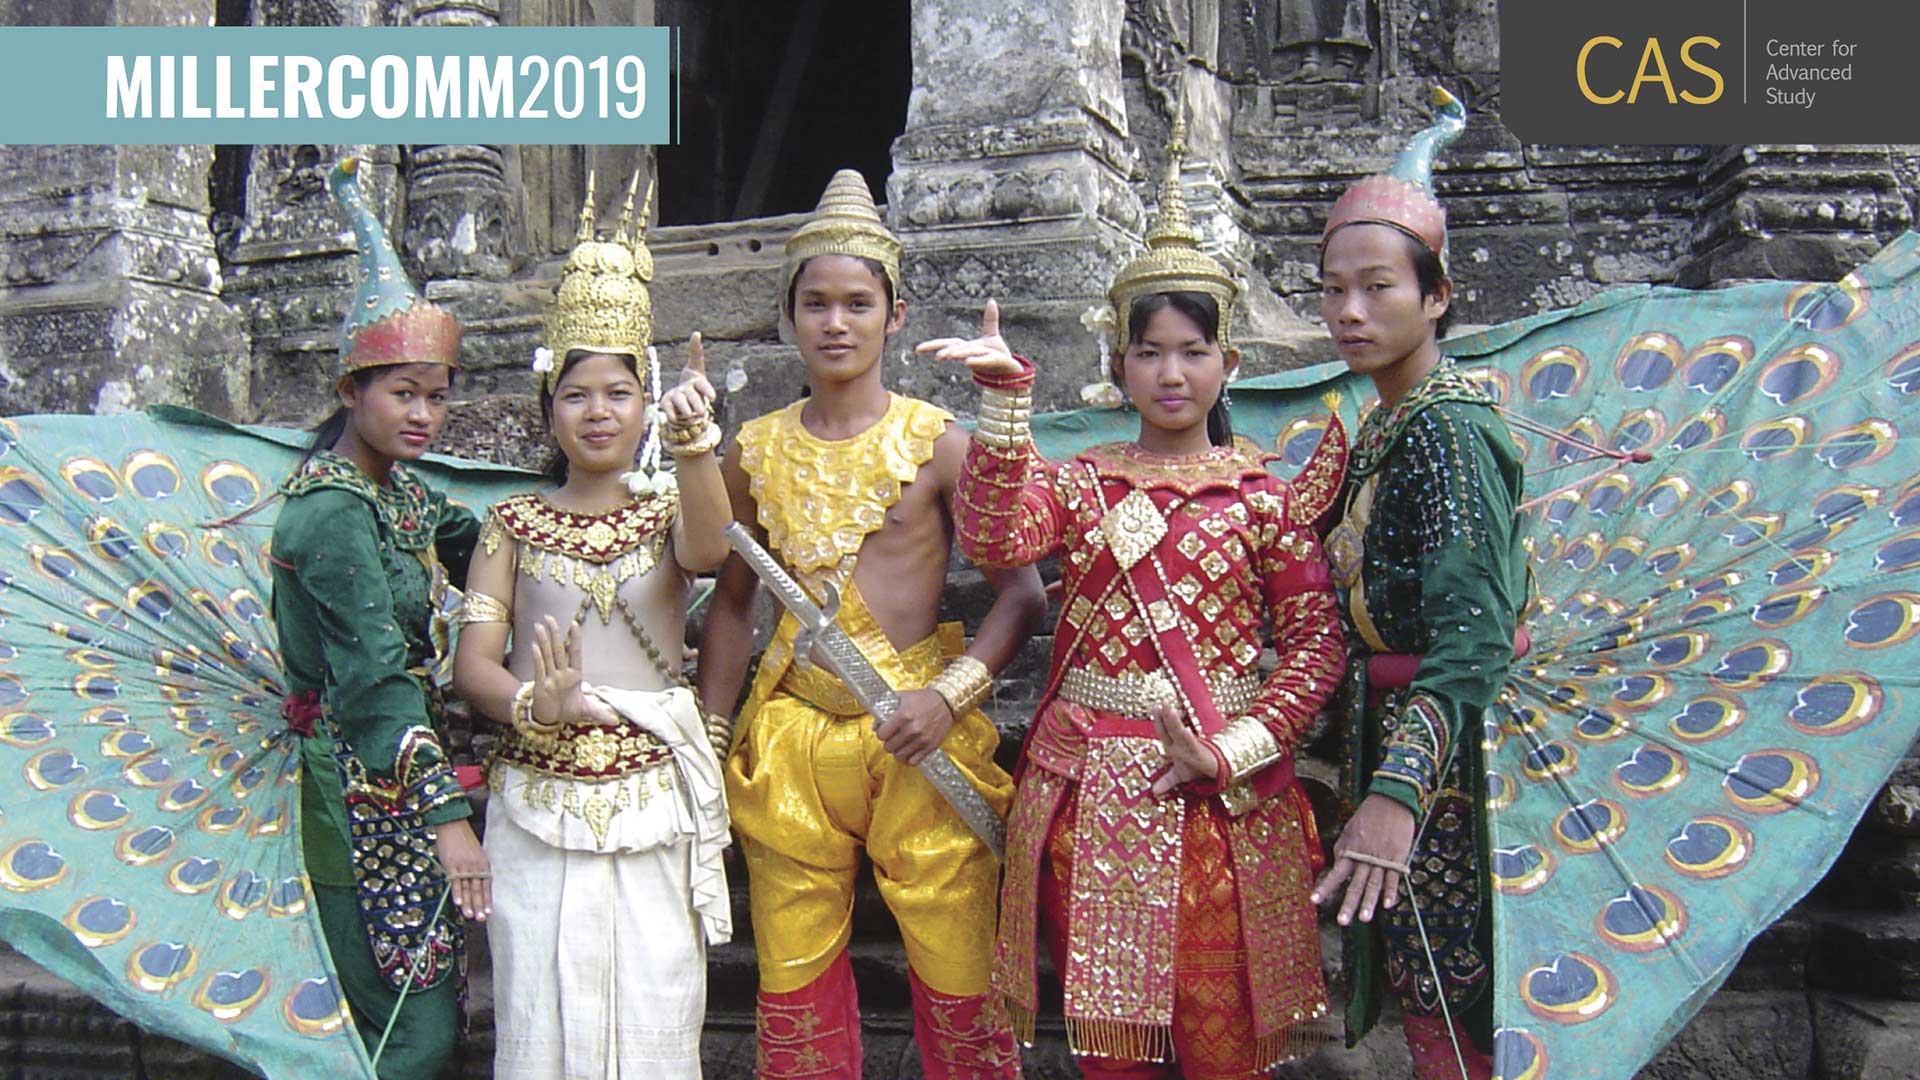 5 people in traditional southeast asia costumes pose in front of a weathered temple-style building